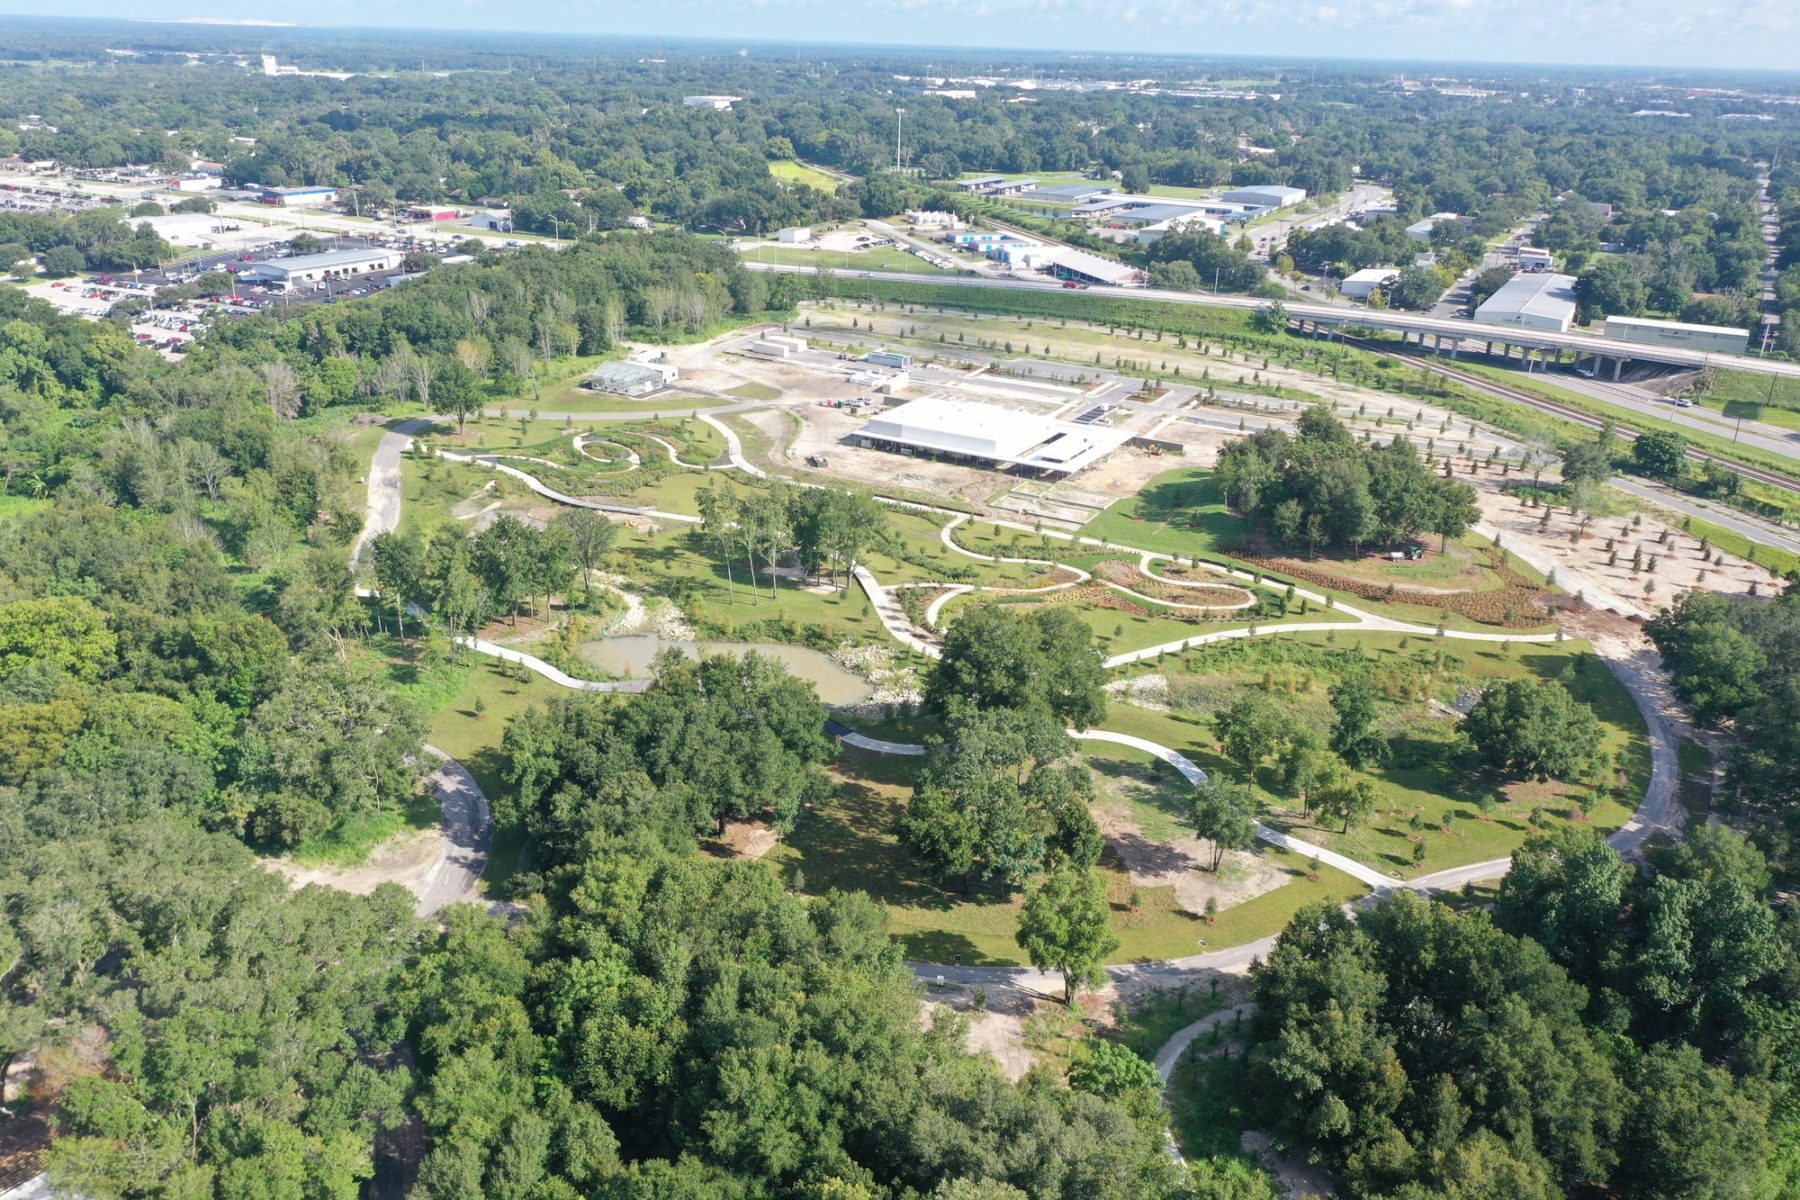 Aerial drone shot of Bonnet Springs Park showing building and site design in progress construction